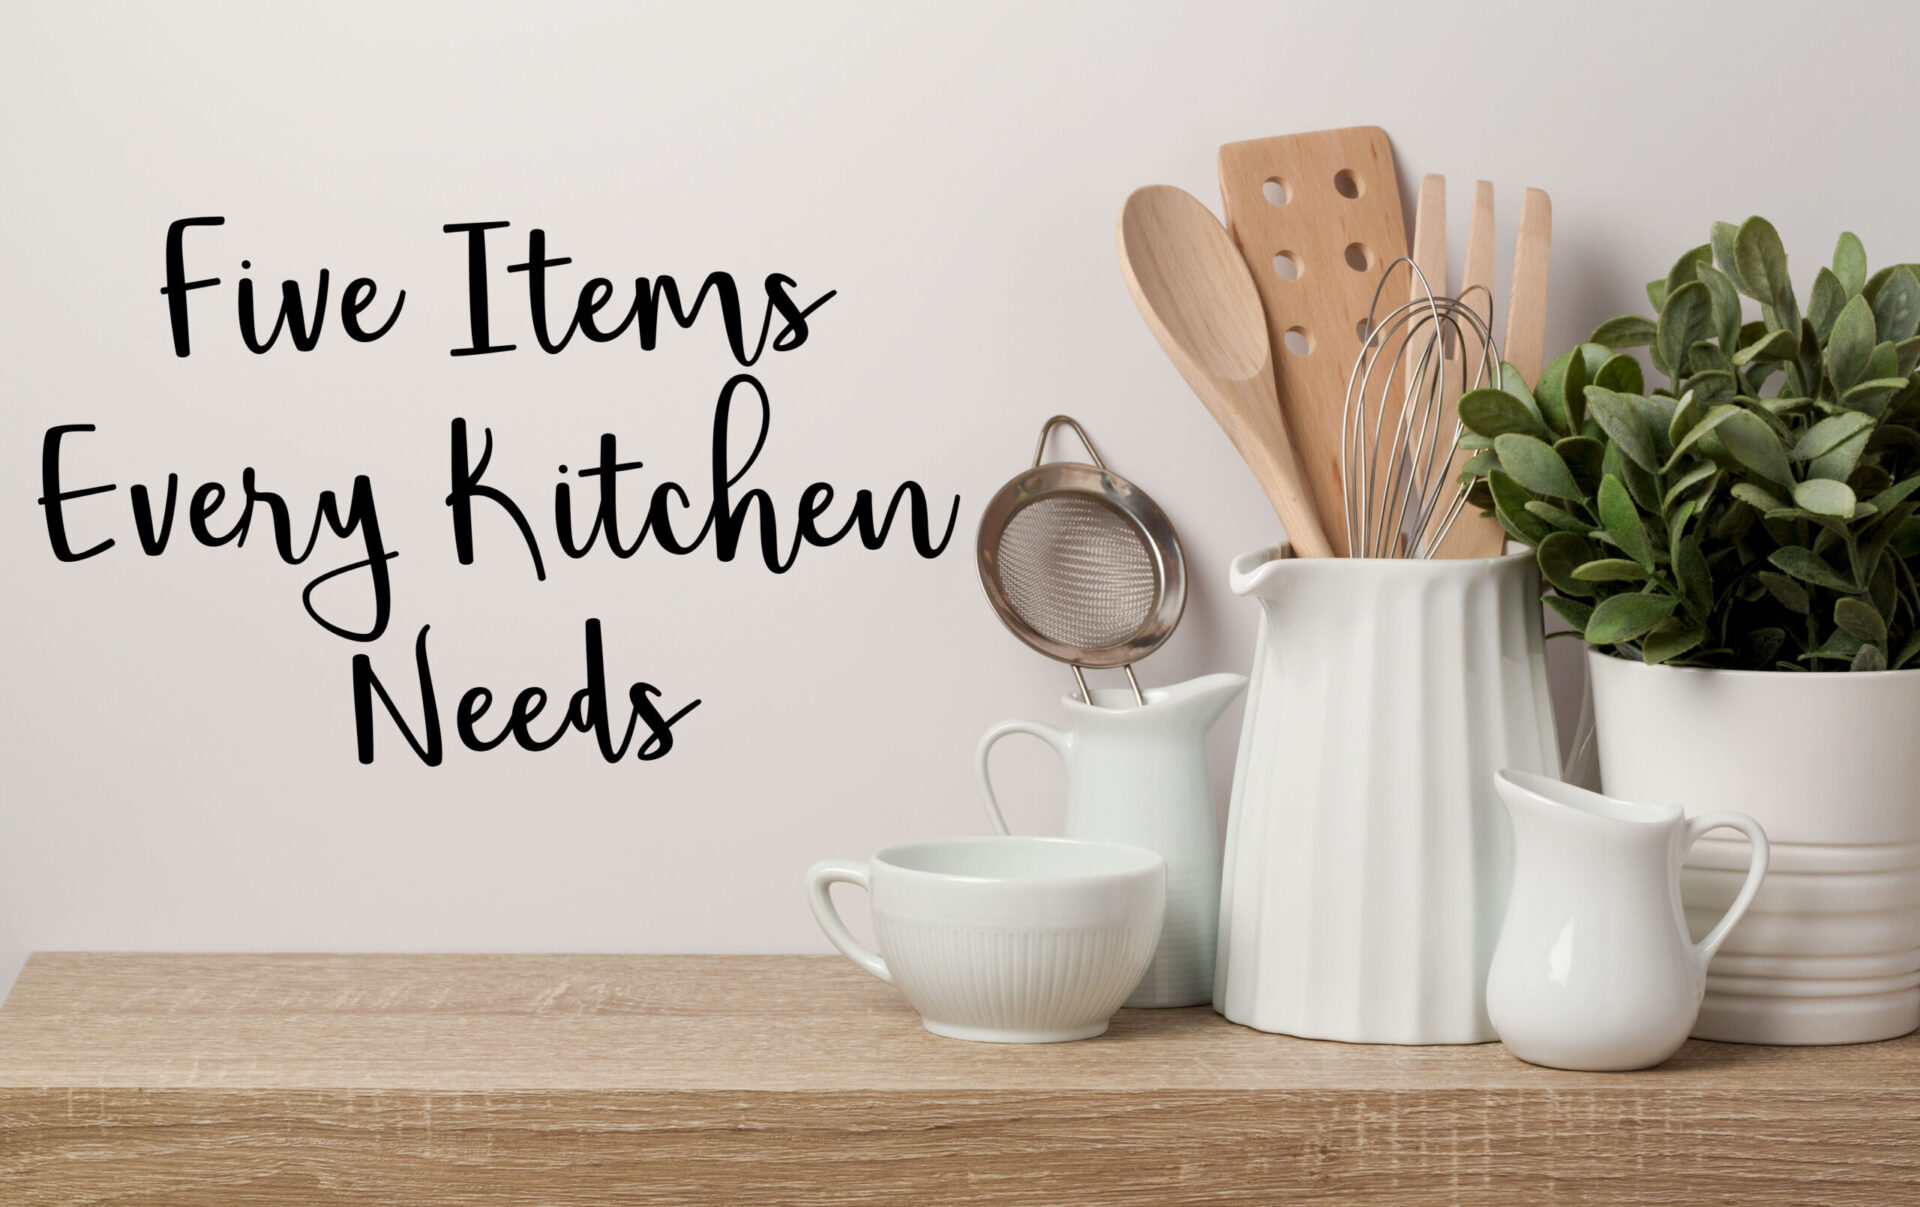 5 Kitchen Items You Didn’t Know You Need